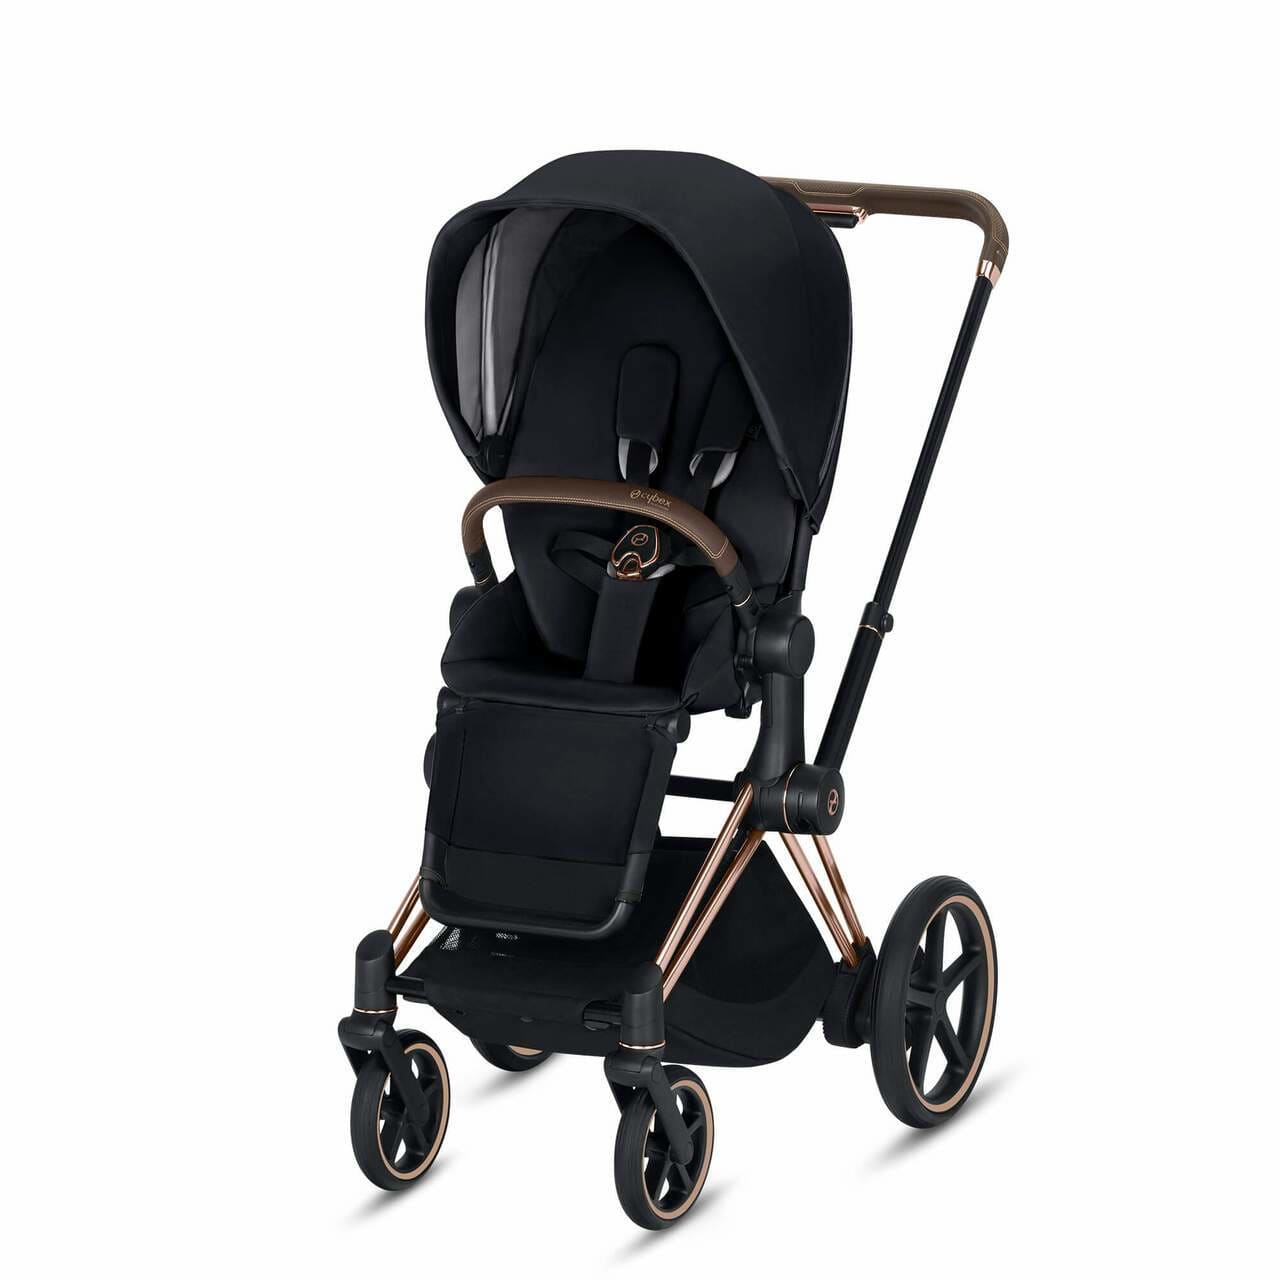 CYBEX ePriam 3-in-1 Travel System Frame in Rose Gold with Brown Details Baby Stroller – Premium Black 519003333 4058511701493
